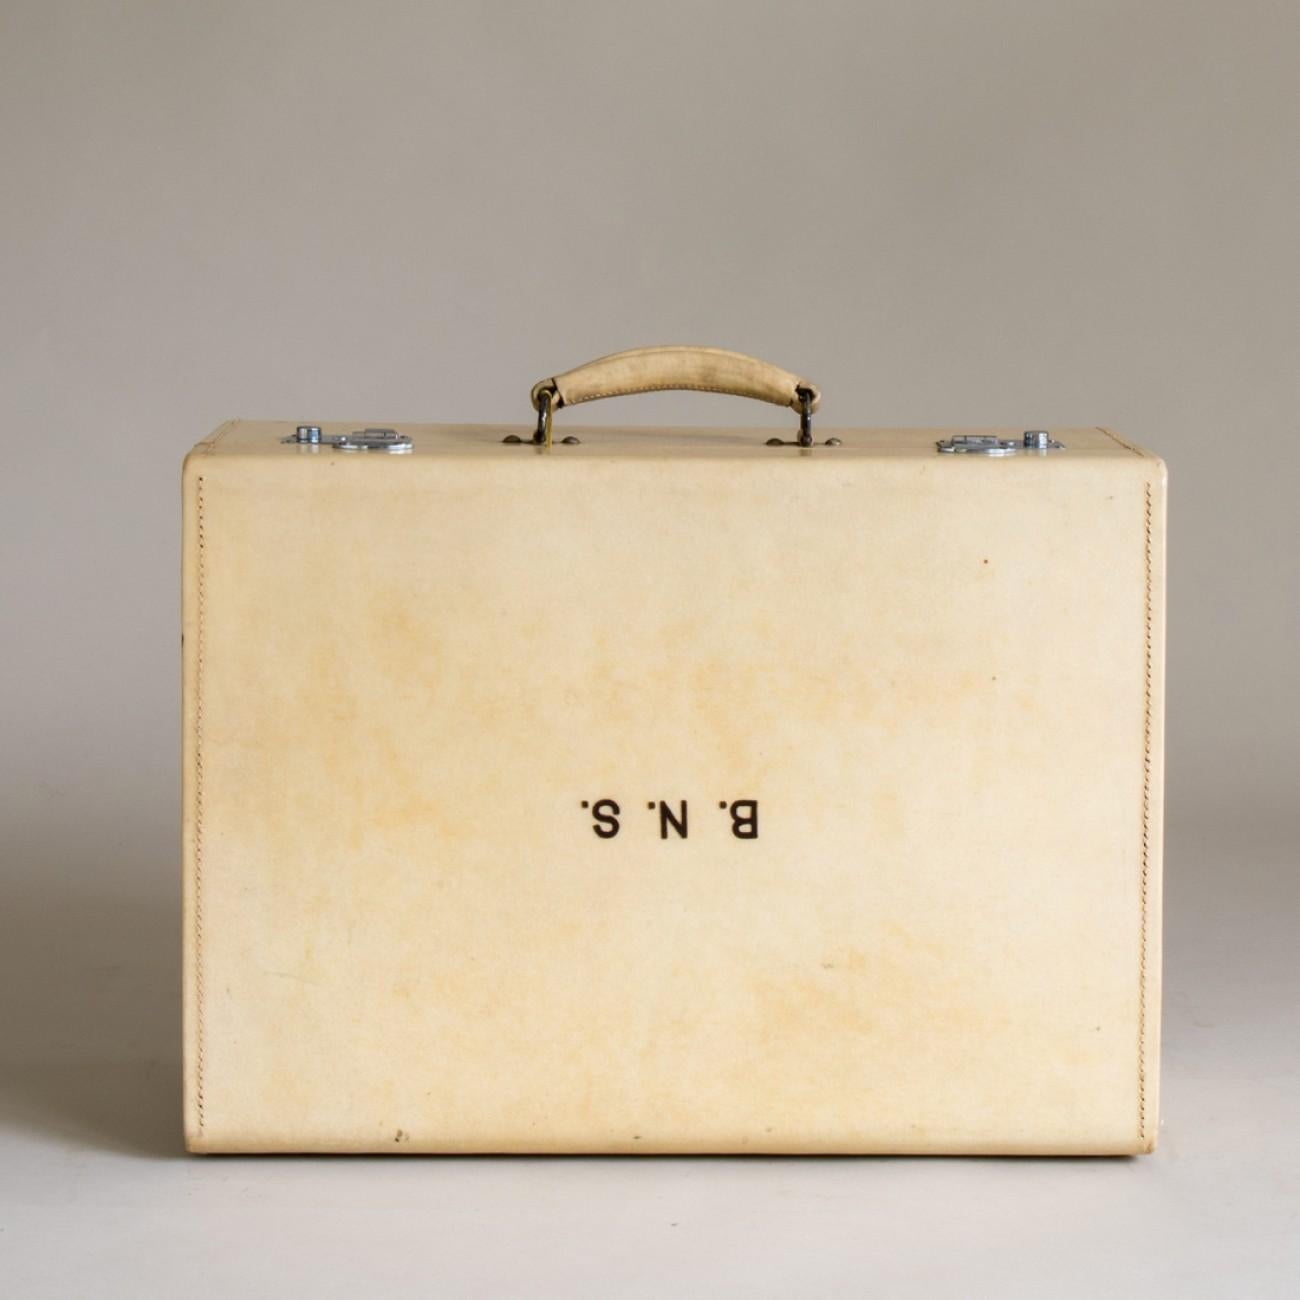 An excellent example of a suitcase made of vellum with nickel plated fittings, original key and original silk lining. Also has embossed initials B.N.S. Circa 1920.

Dimensions: 21cm/8¼ inches (height) x 73.5cm/29 inches (width) x 39.5cm/15½